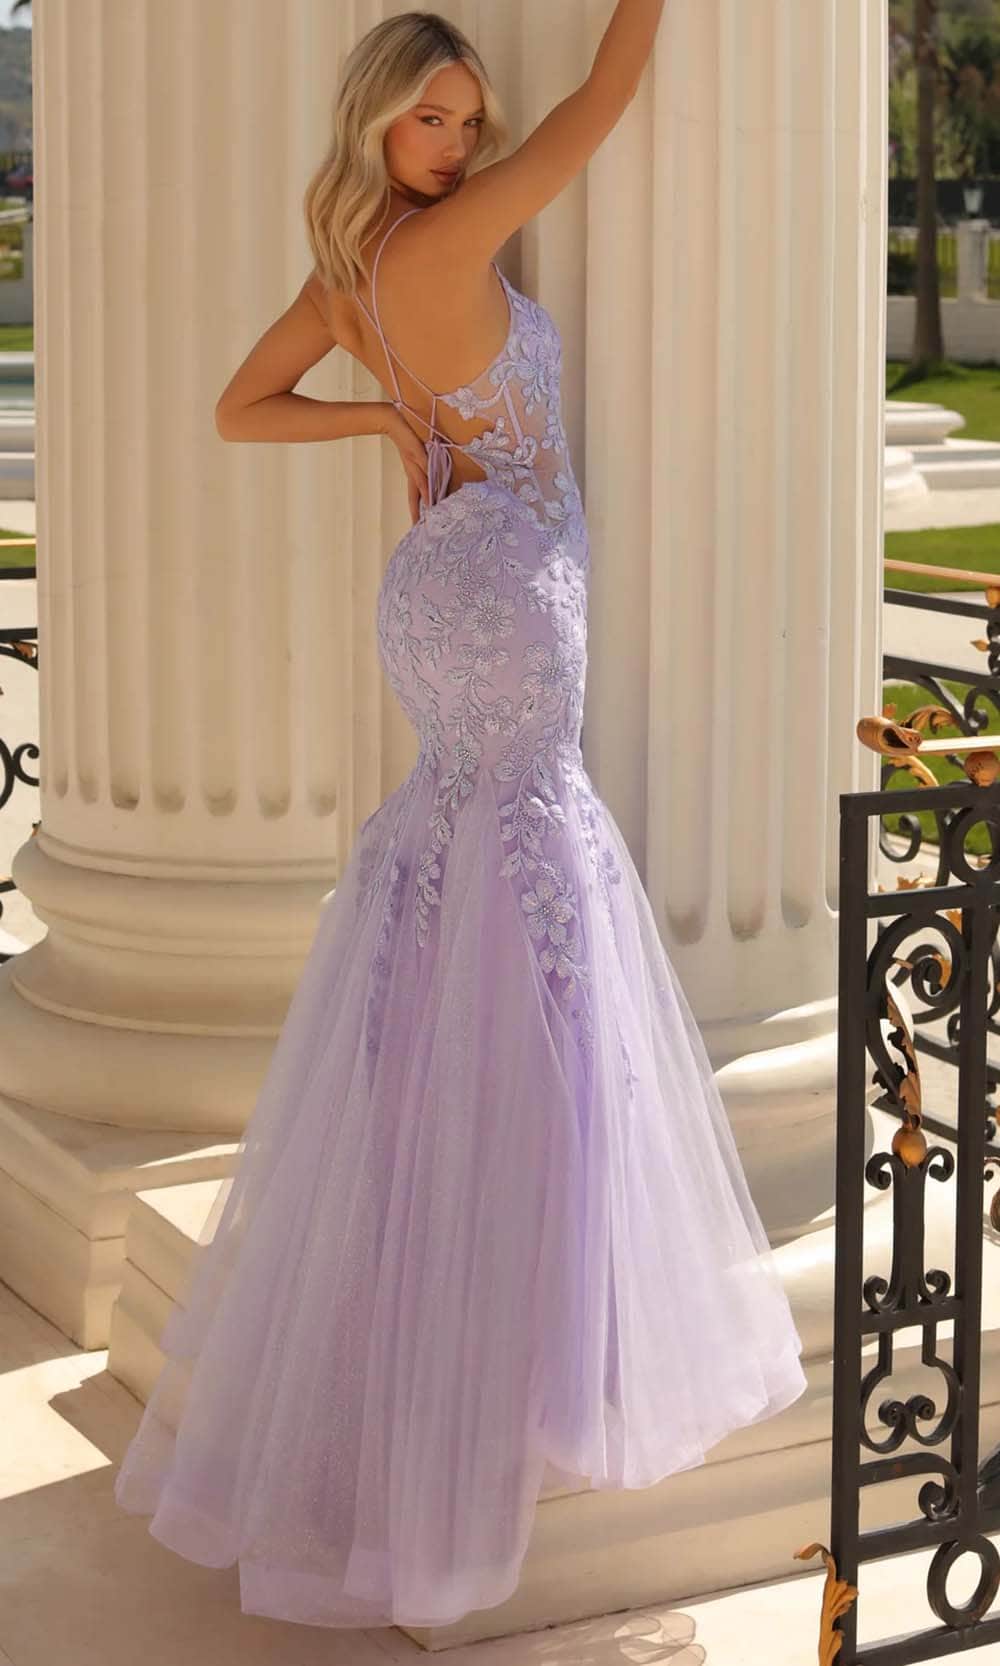 Clarisse 810856 - Sleeveless Prom Gown